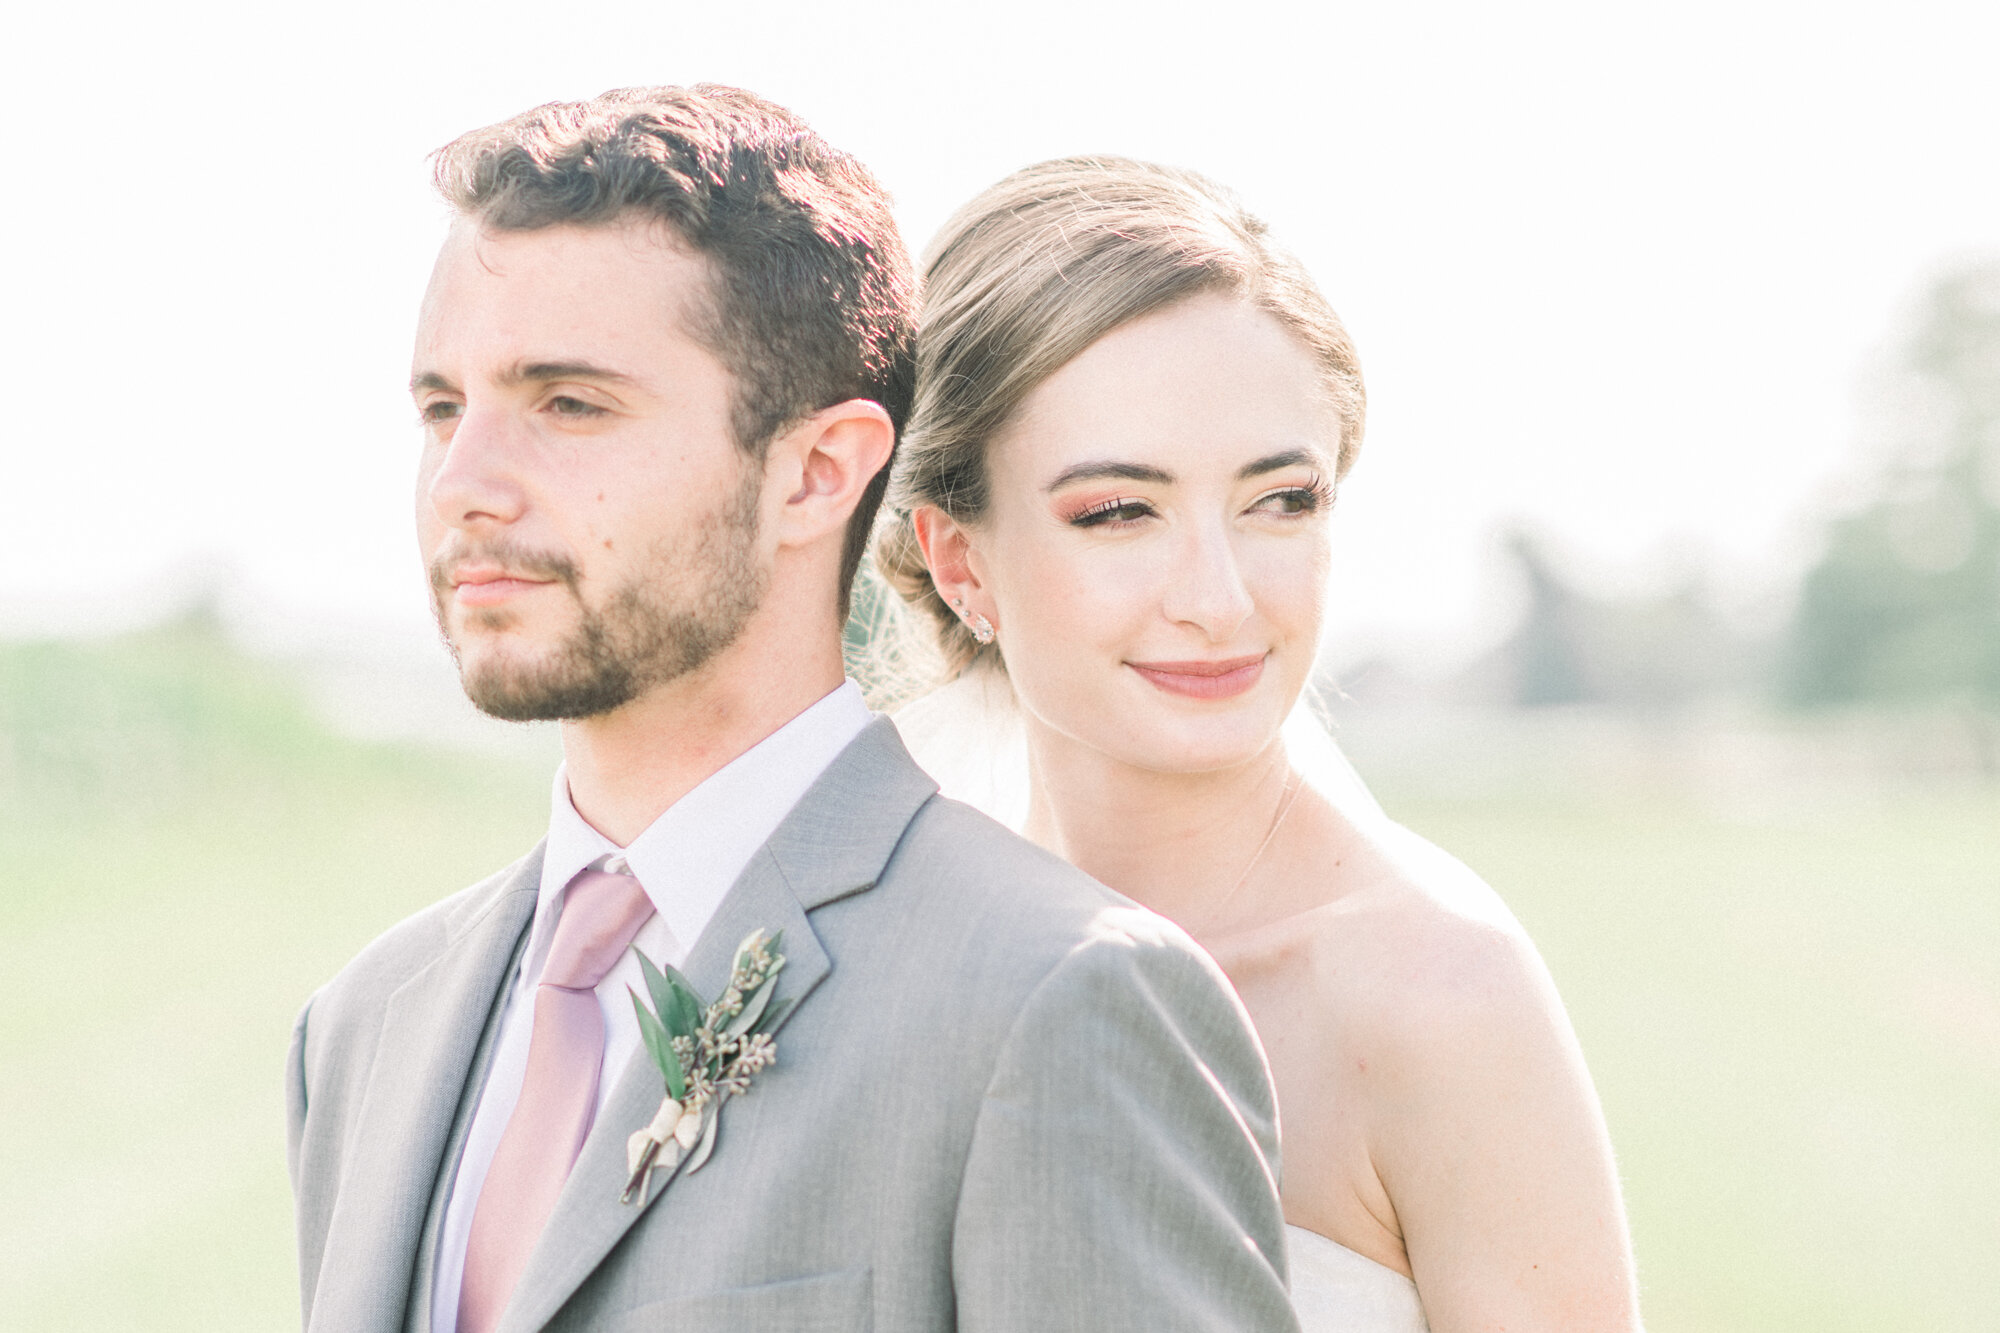 Rustic chic summer wedding at Lakeview farms in Dover, Pennsylvania. With floral design by Blossom Bliss Florals and captured by central pa wedding photographer Lindsay Eileen Photography